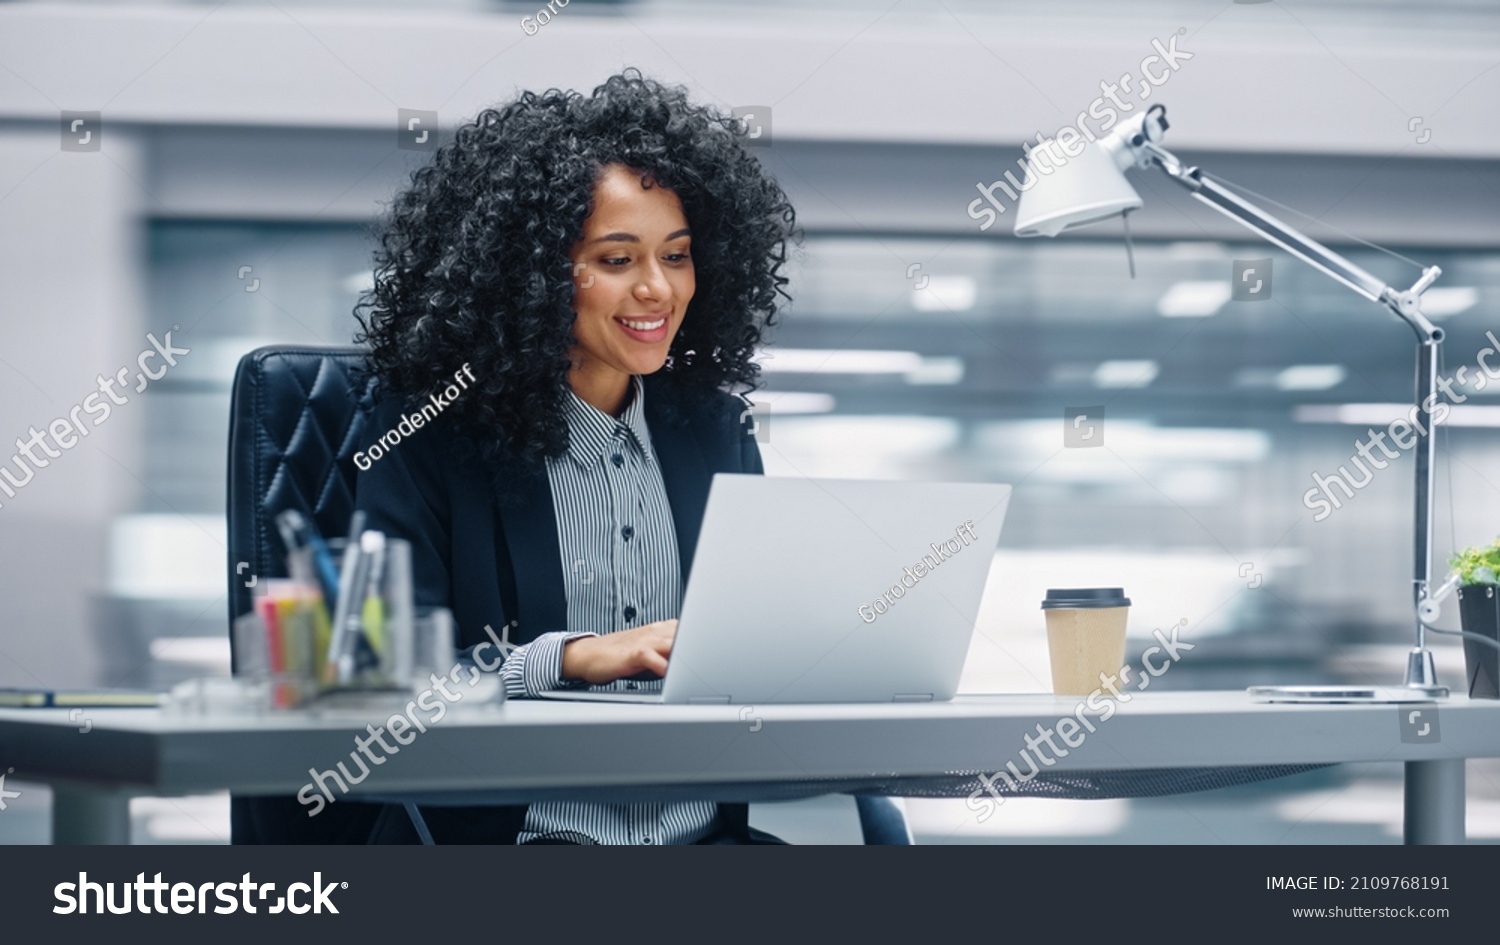 Modern Office: Black Businesswoman Sitting at Her Desk Working on a Laptop Computer. Smiling Successful African American Woman working with Big Data e-Commerce. Motion Blur Background #2109768191